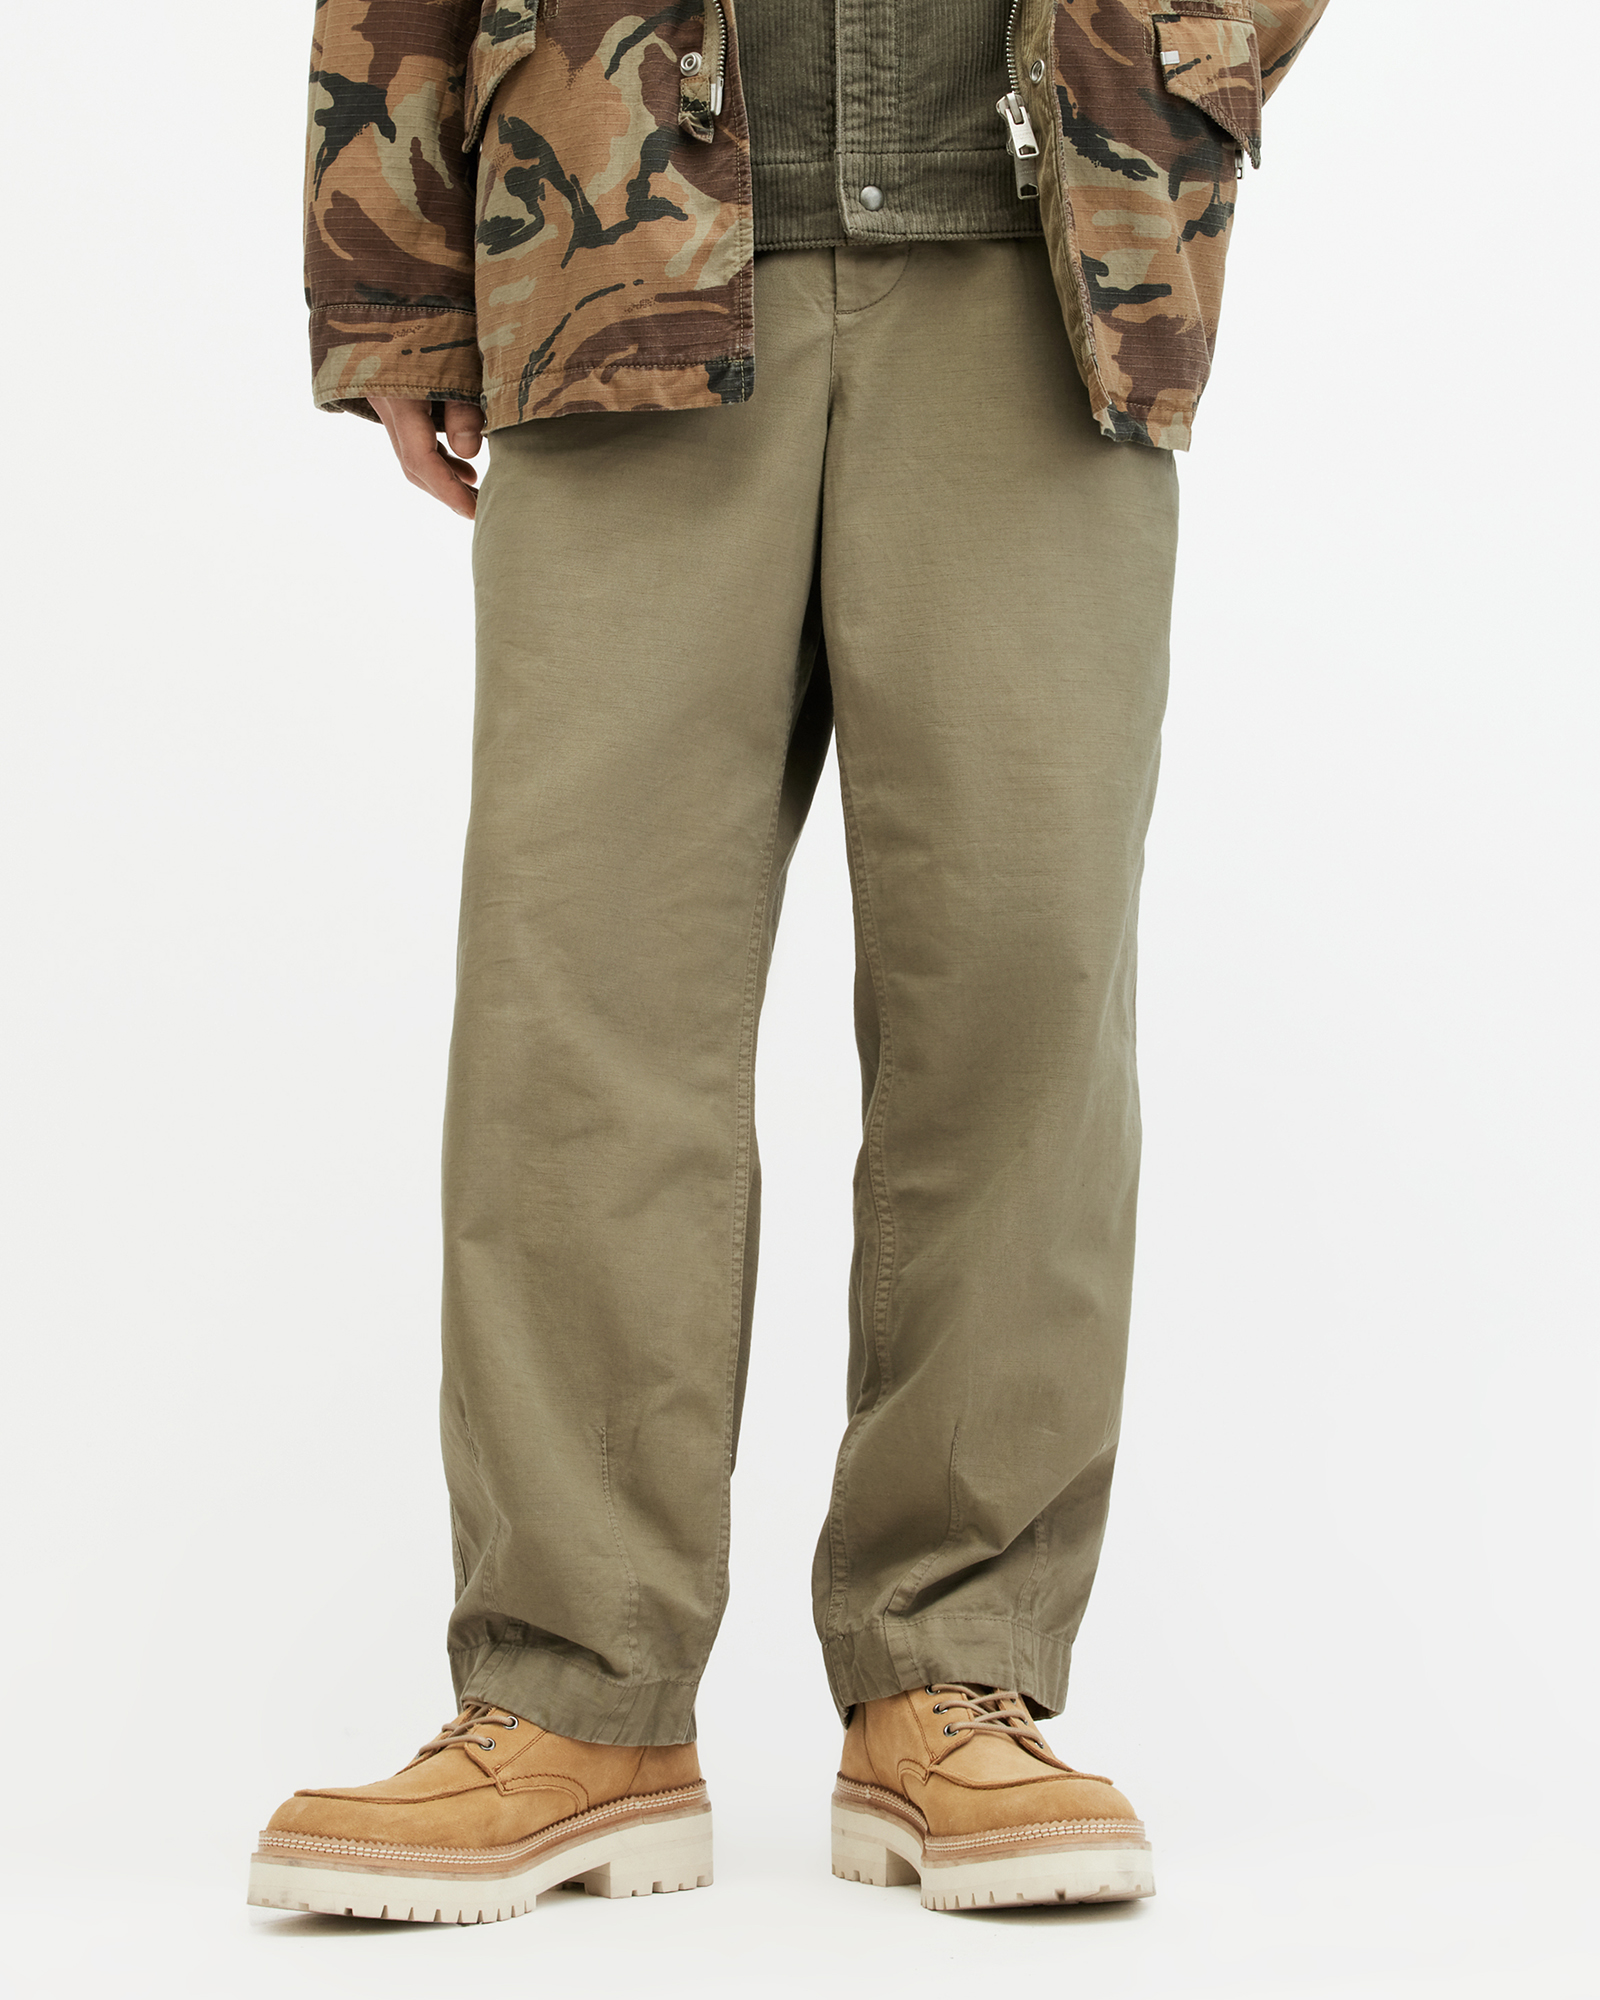 AllSaints Buck Wide Tapered Fit Trousers,, Military Green, Size: 34